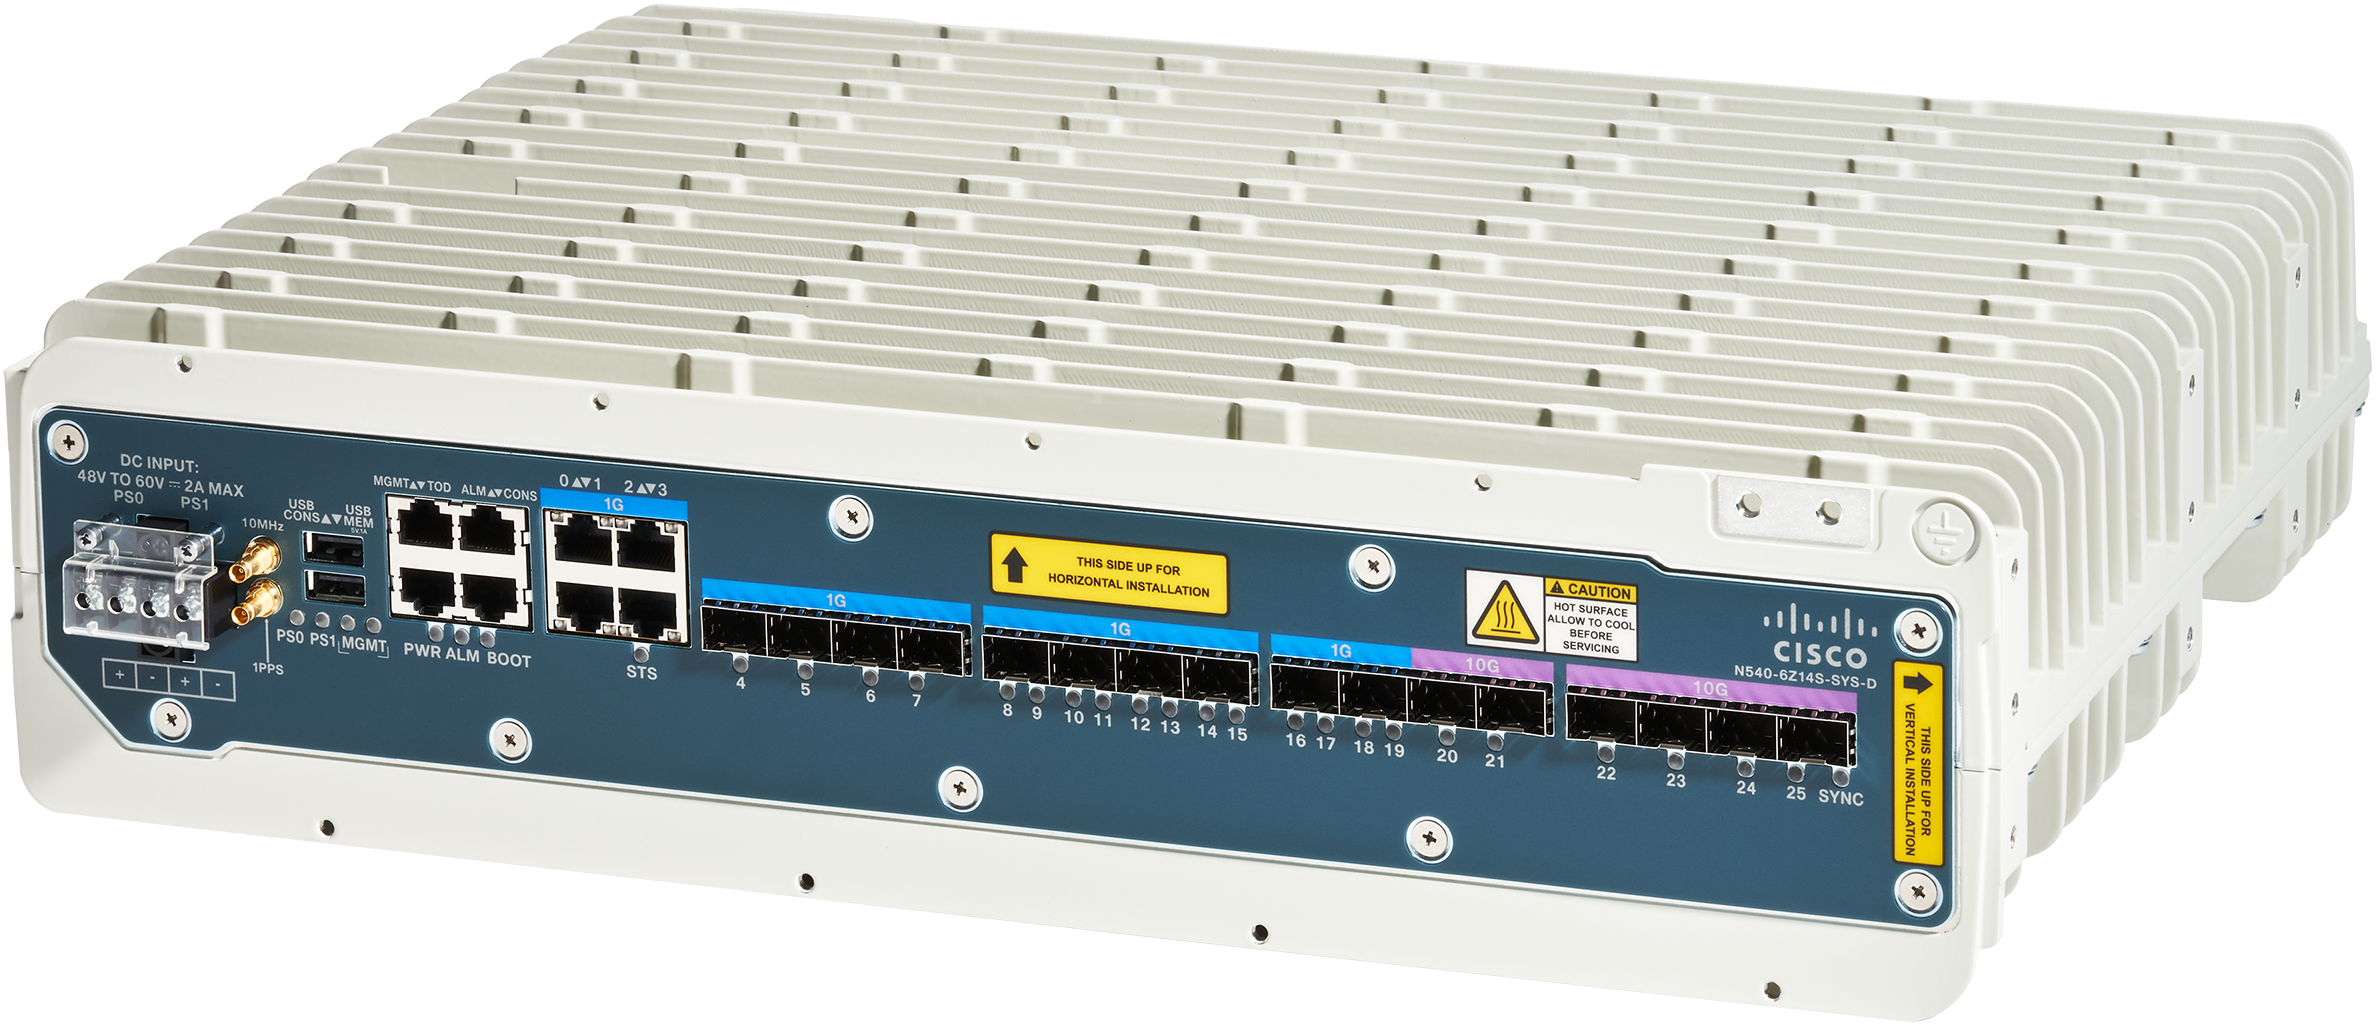 Cisco NCS 540 Small Density Routers